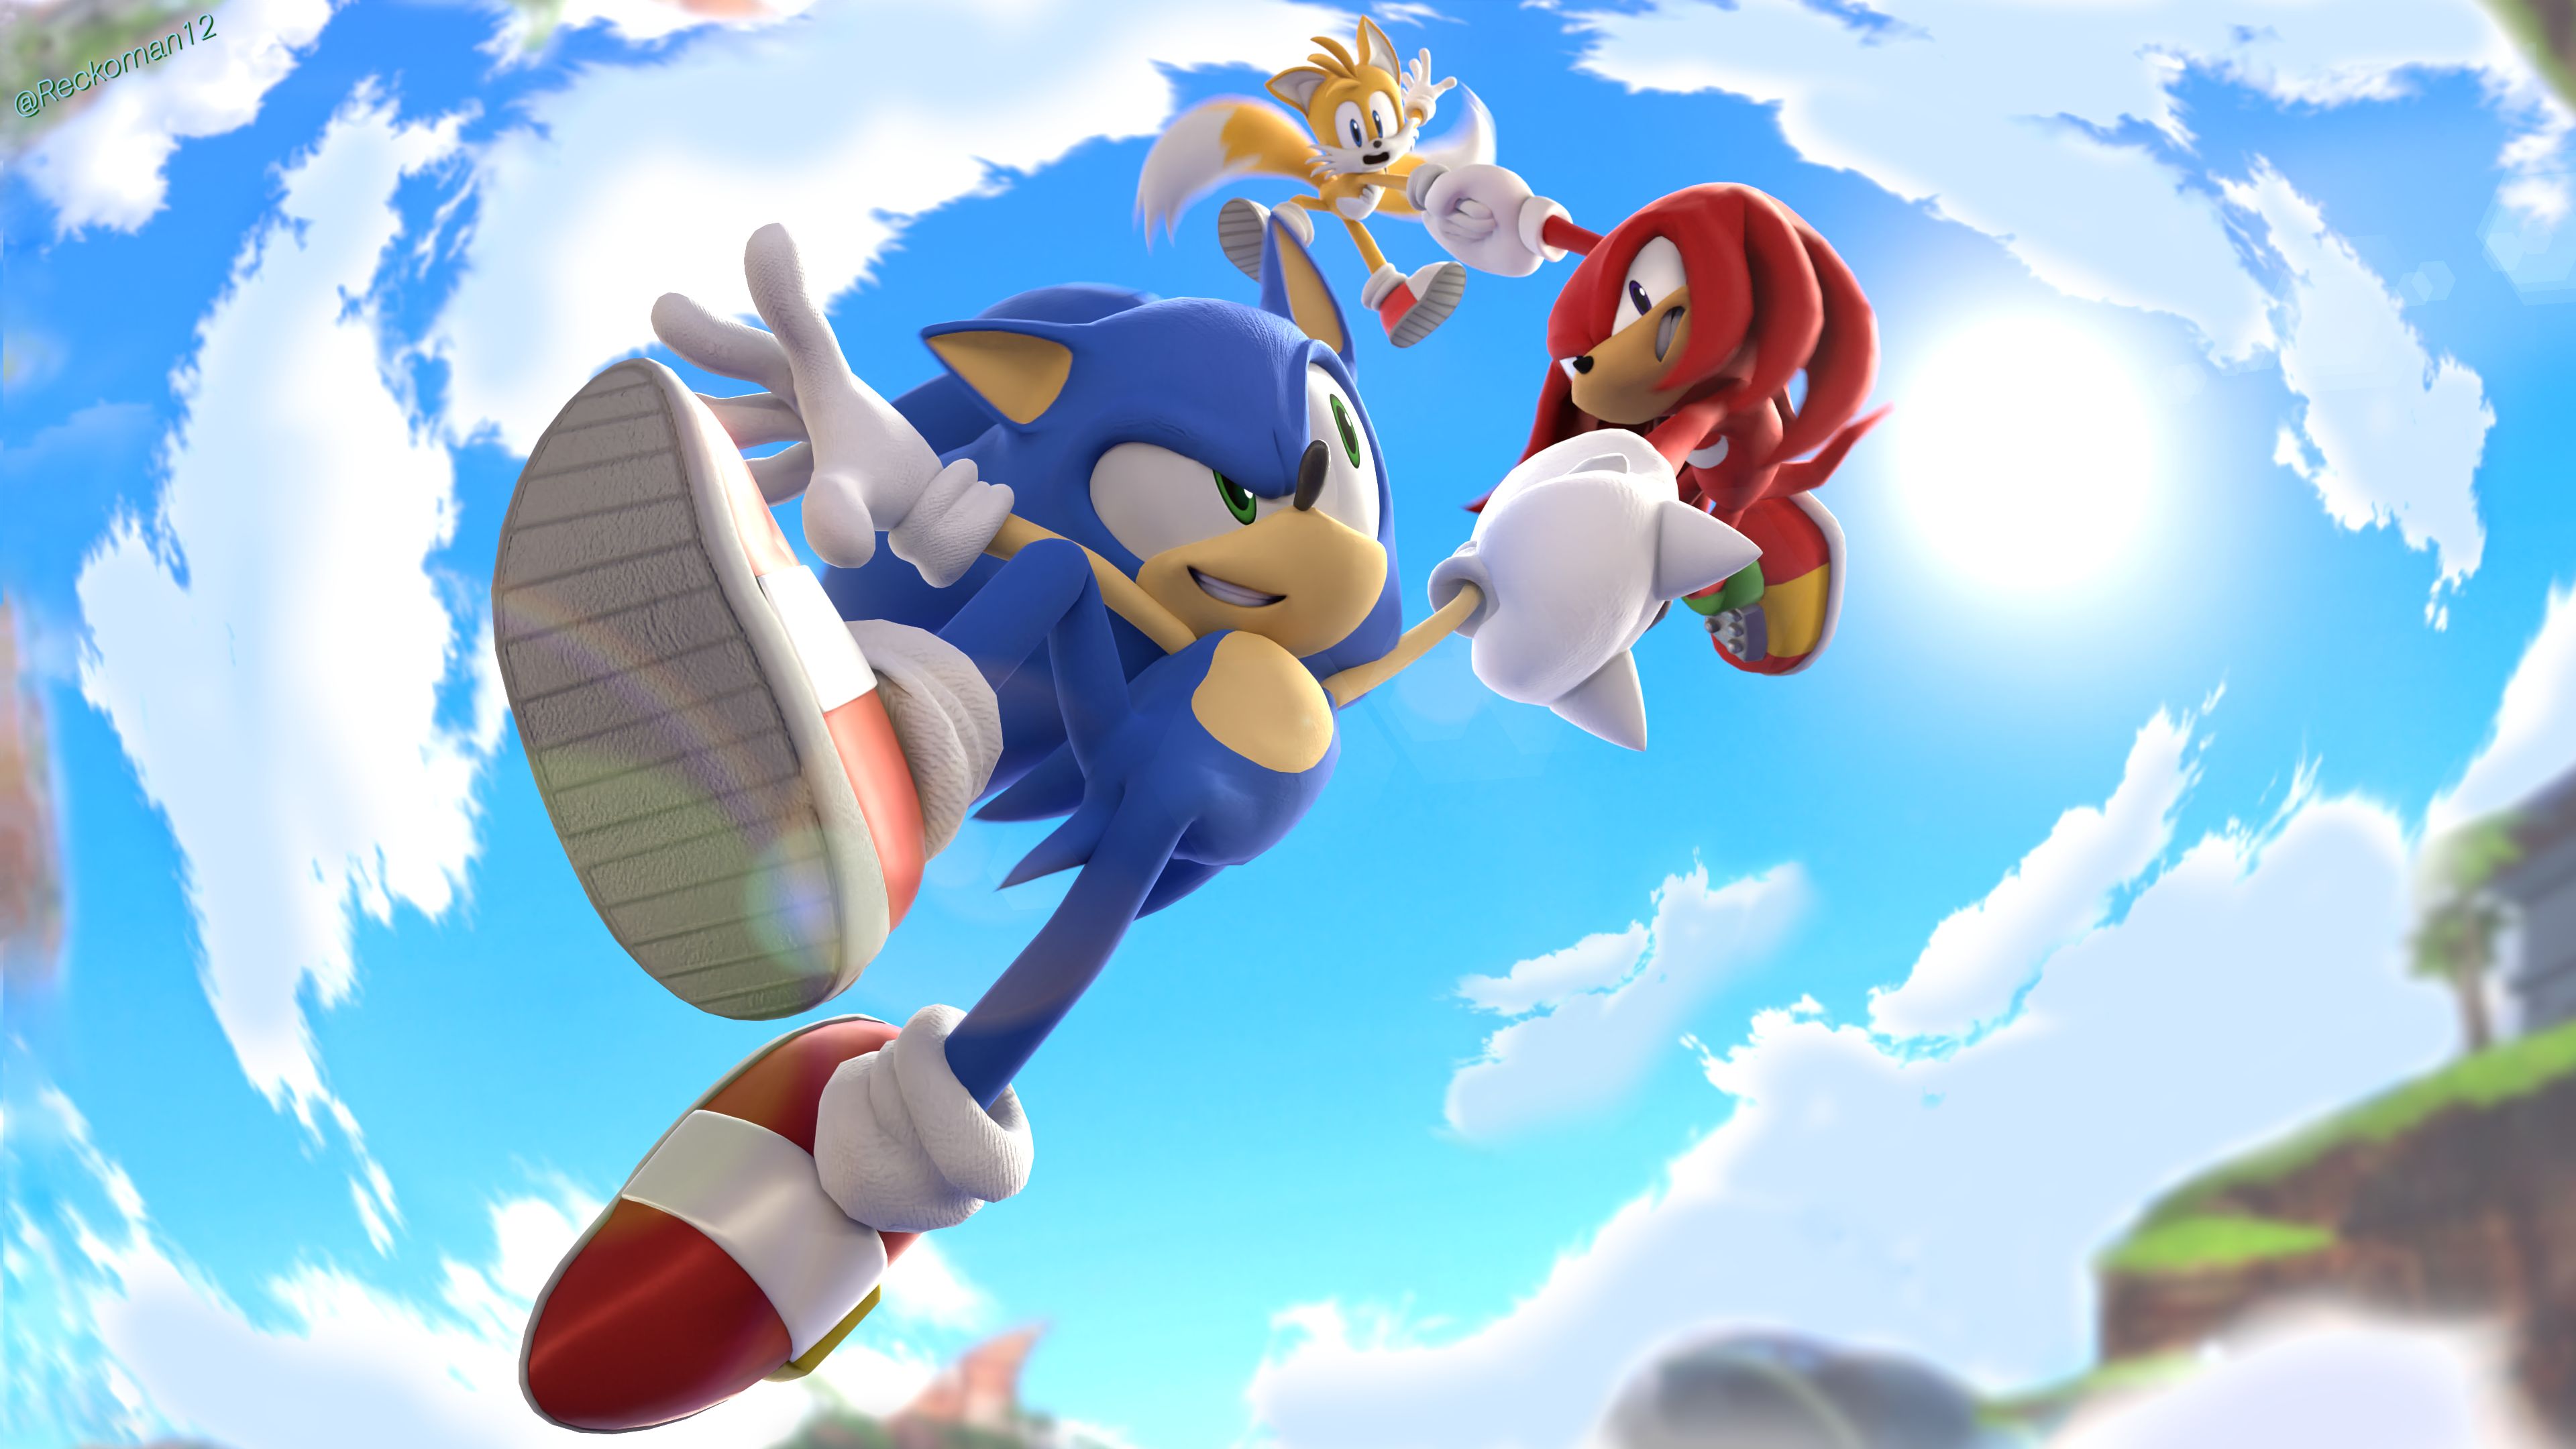 sonic heroes, video game, knuckles the echidna, miles 'tails' prower, sky, sonic the hedgehog, sonic